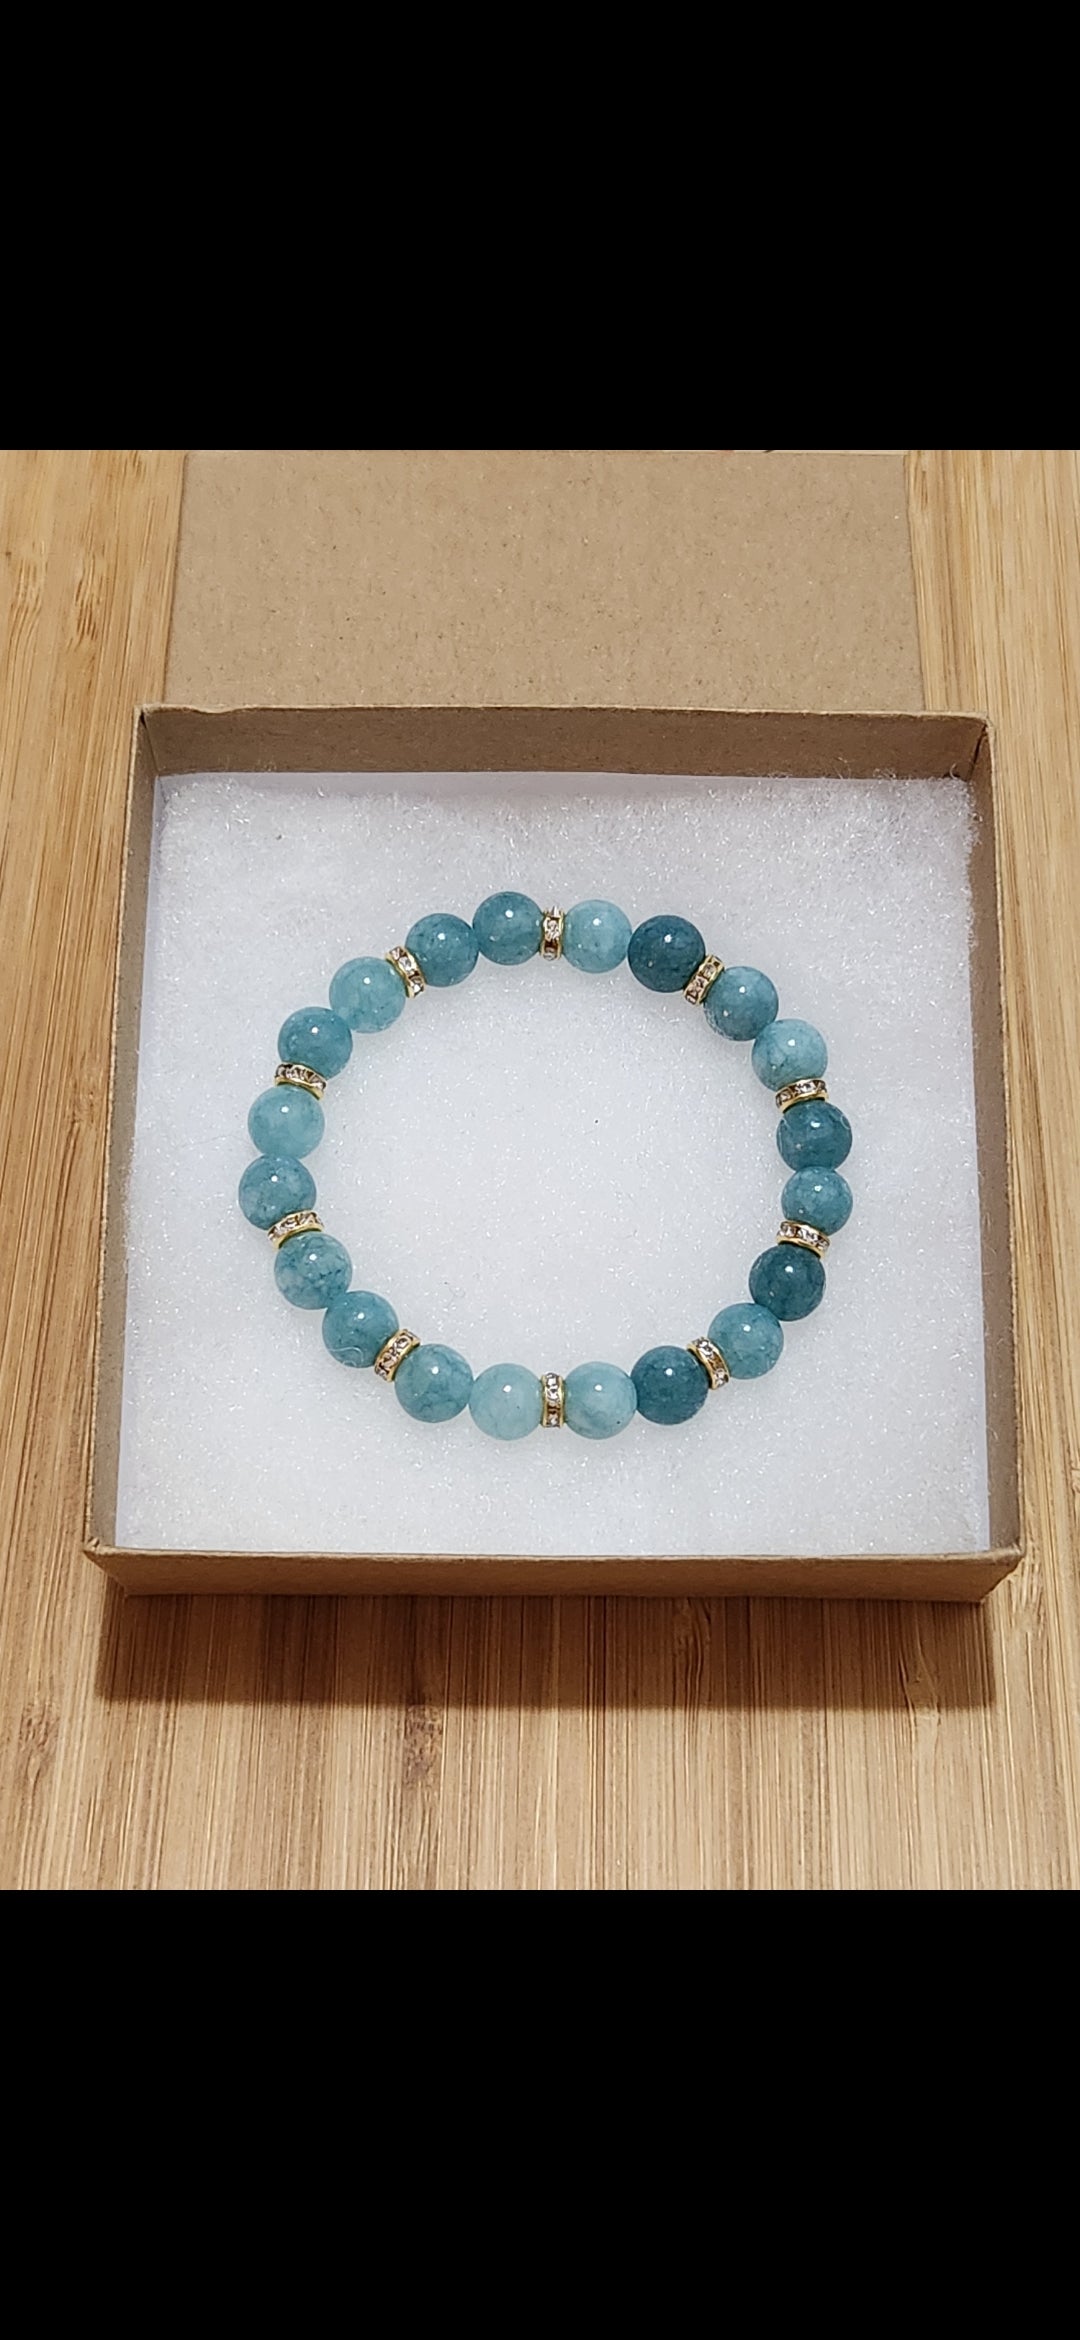 Aquamarine Stone beaded bracelet with sparkle accents - peace - courage - healing